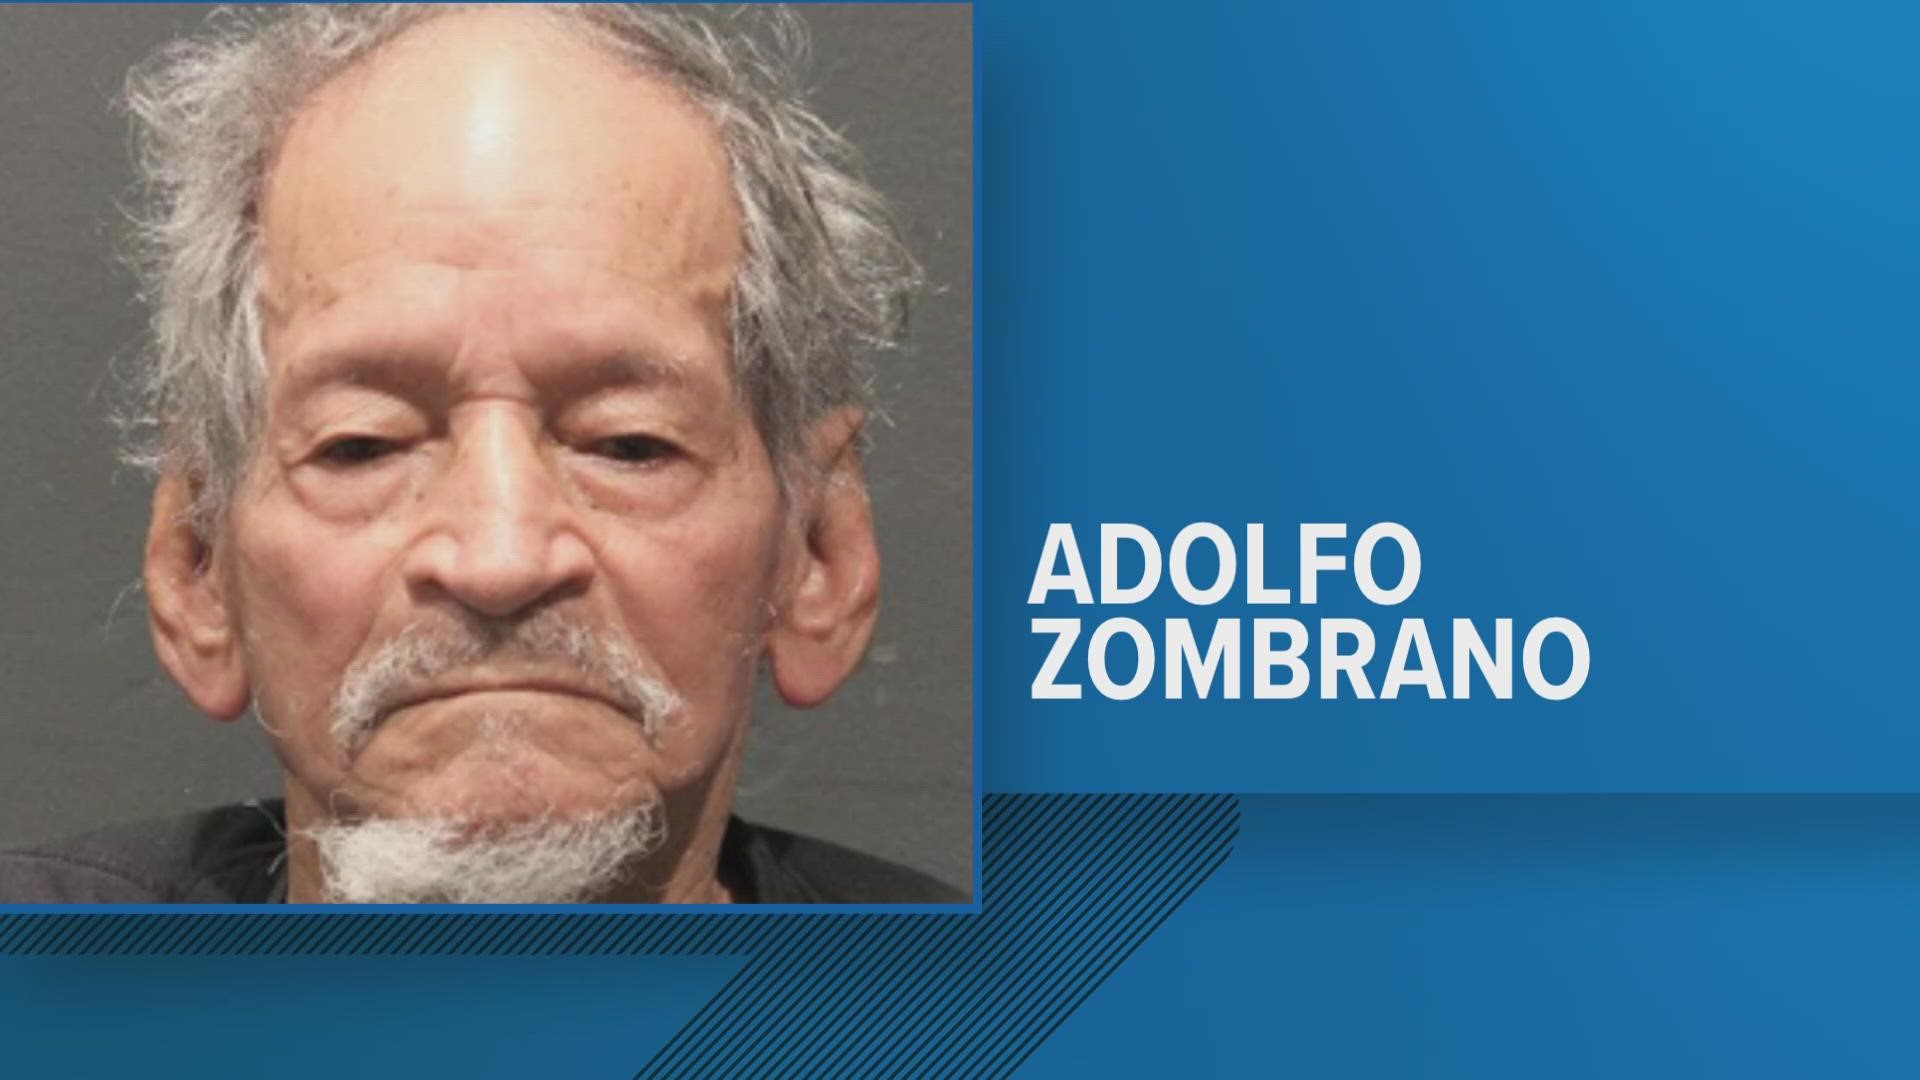 A 94-year-old Arlington man is facing charges after allegedly inappropriately touching a child. Police believe this is not a one time occurrence.